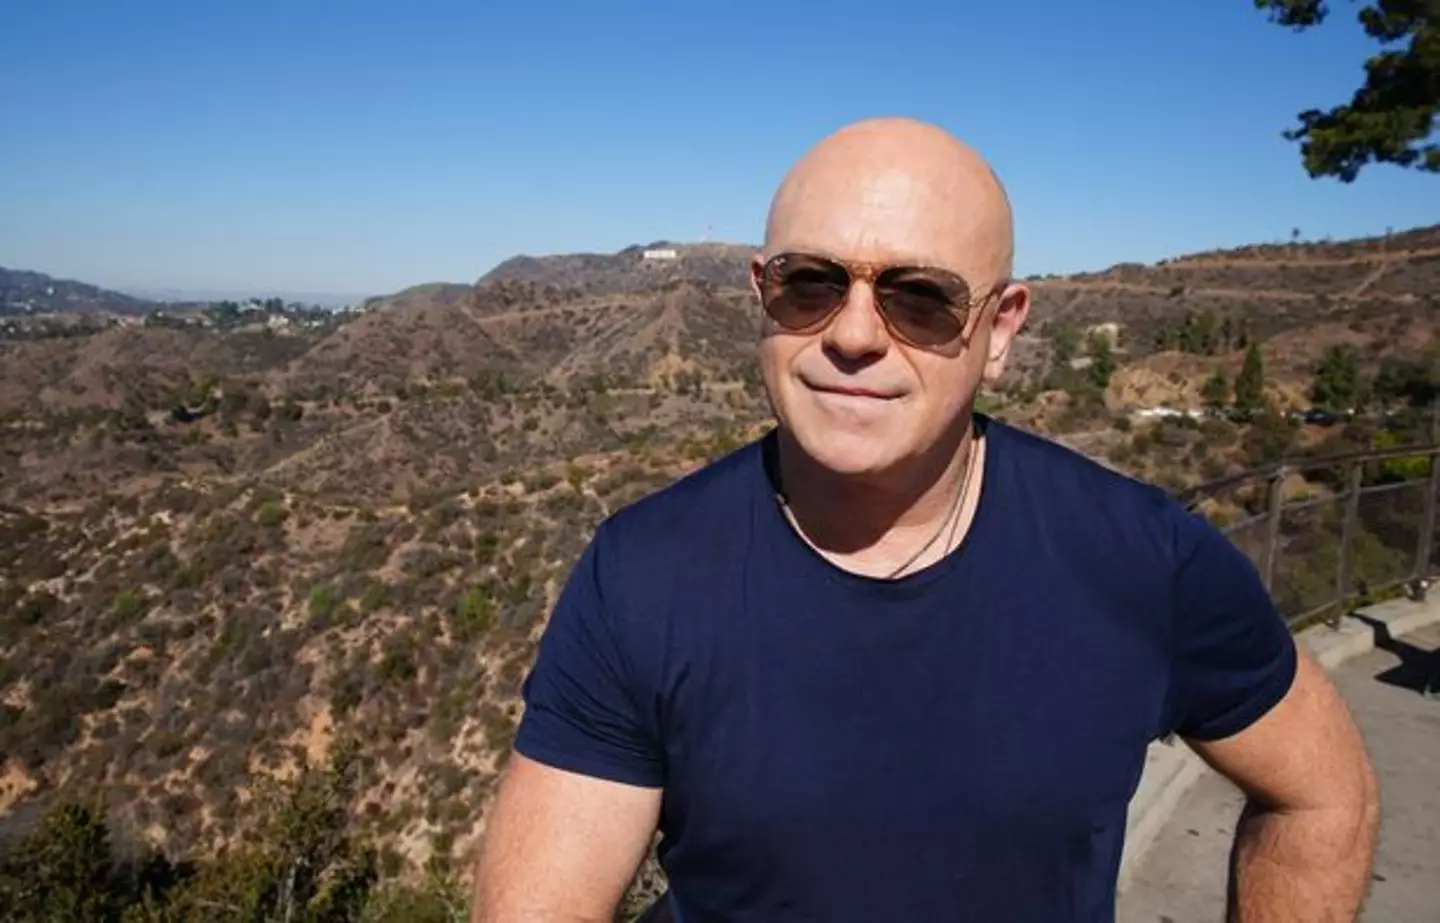 Ross Kemp's documentary looked into the fate of animals at Neverland Ranch.